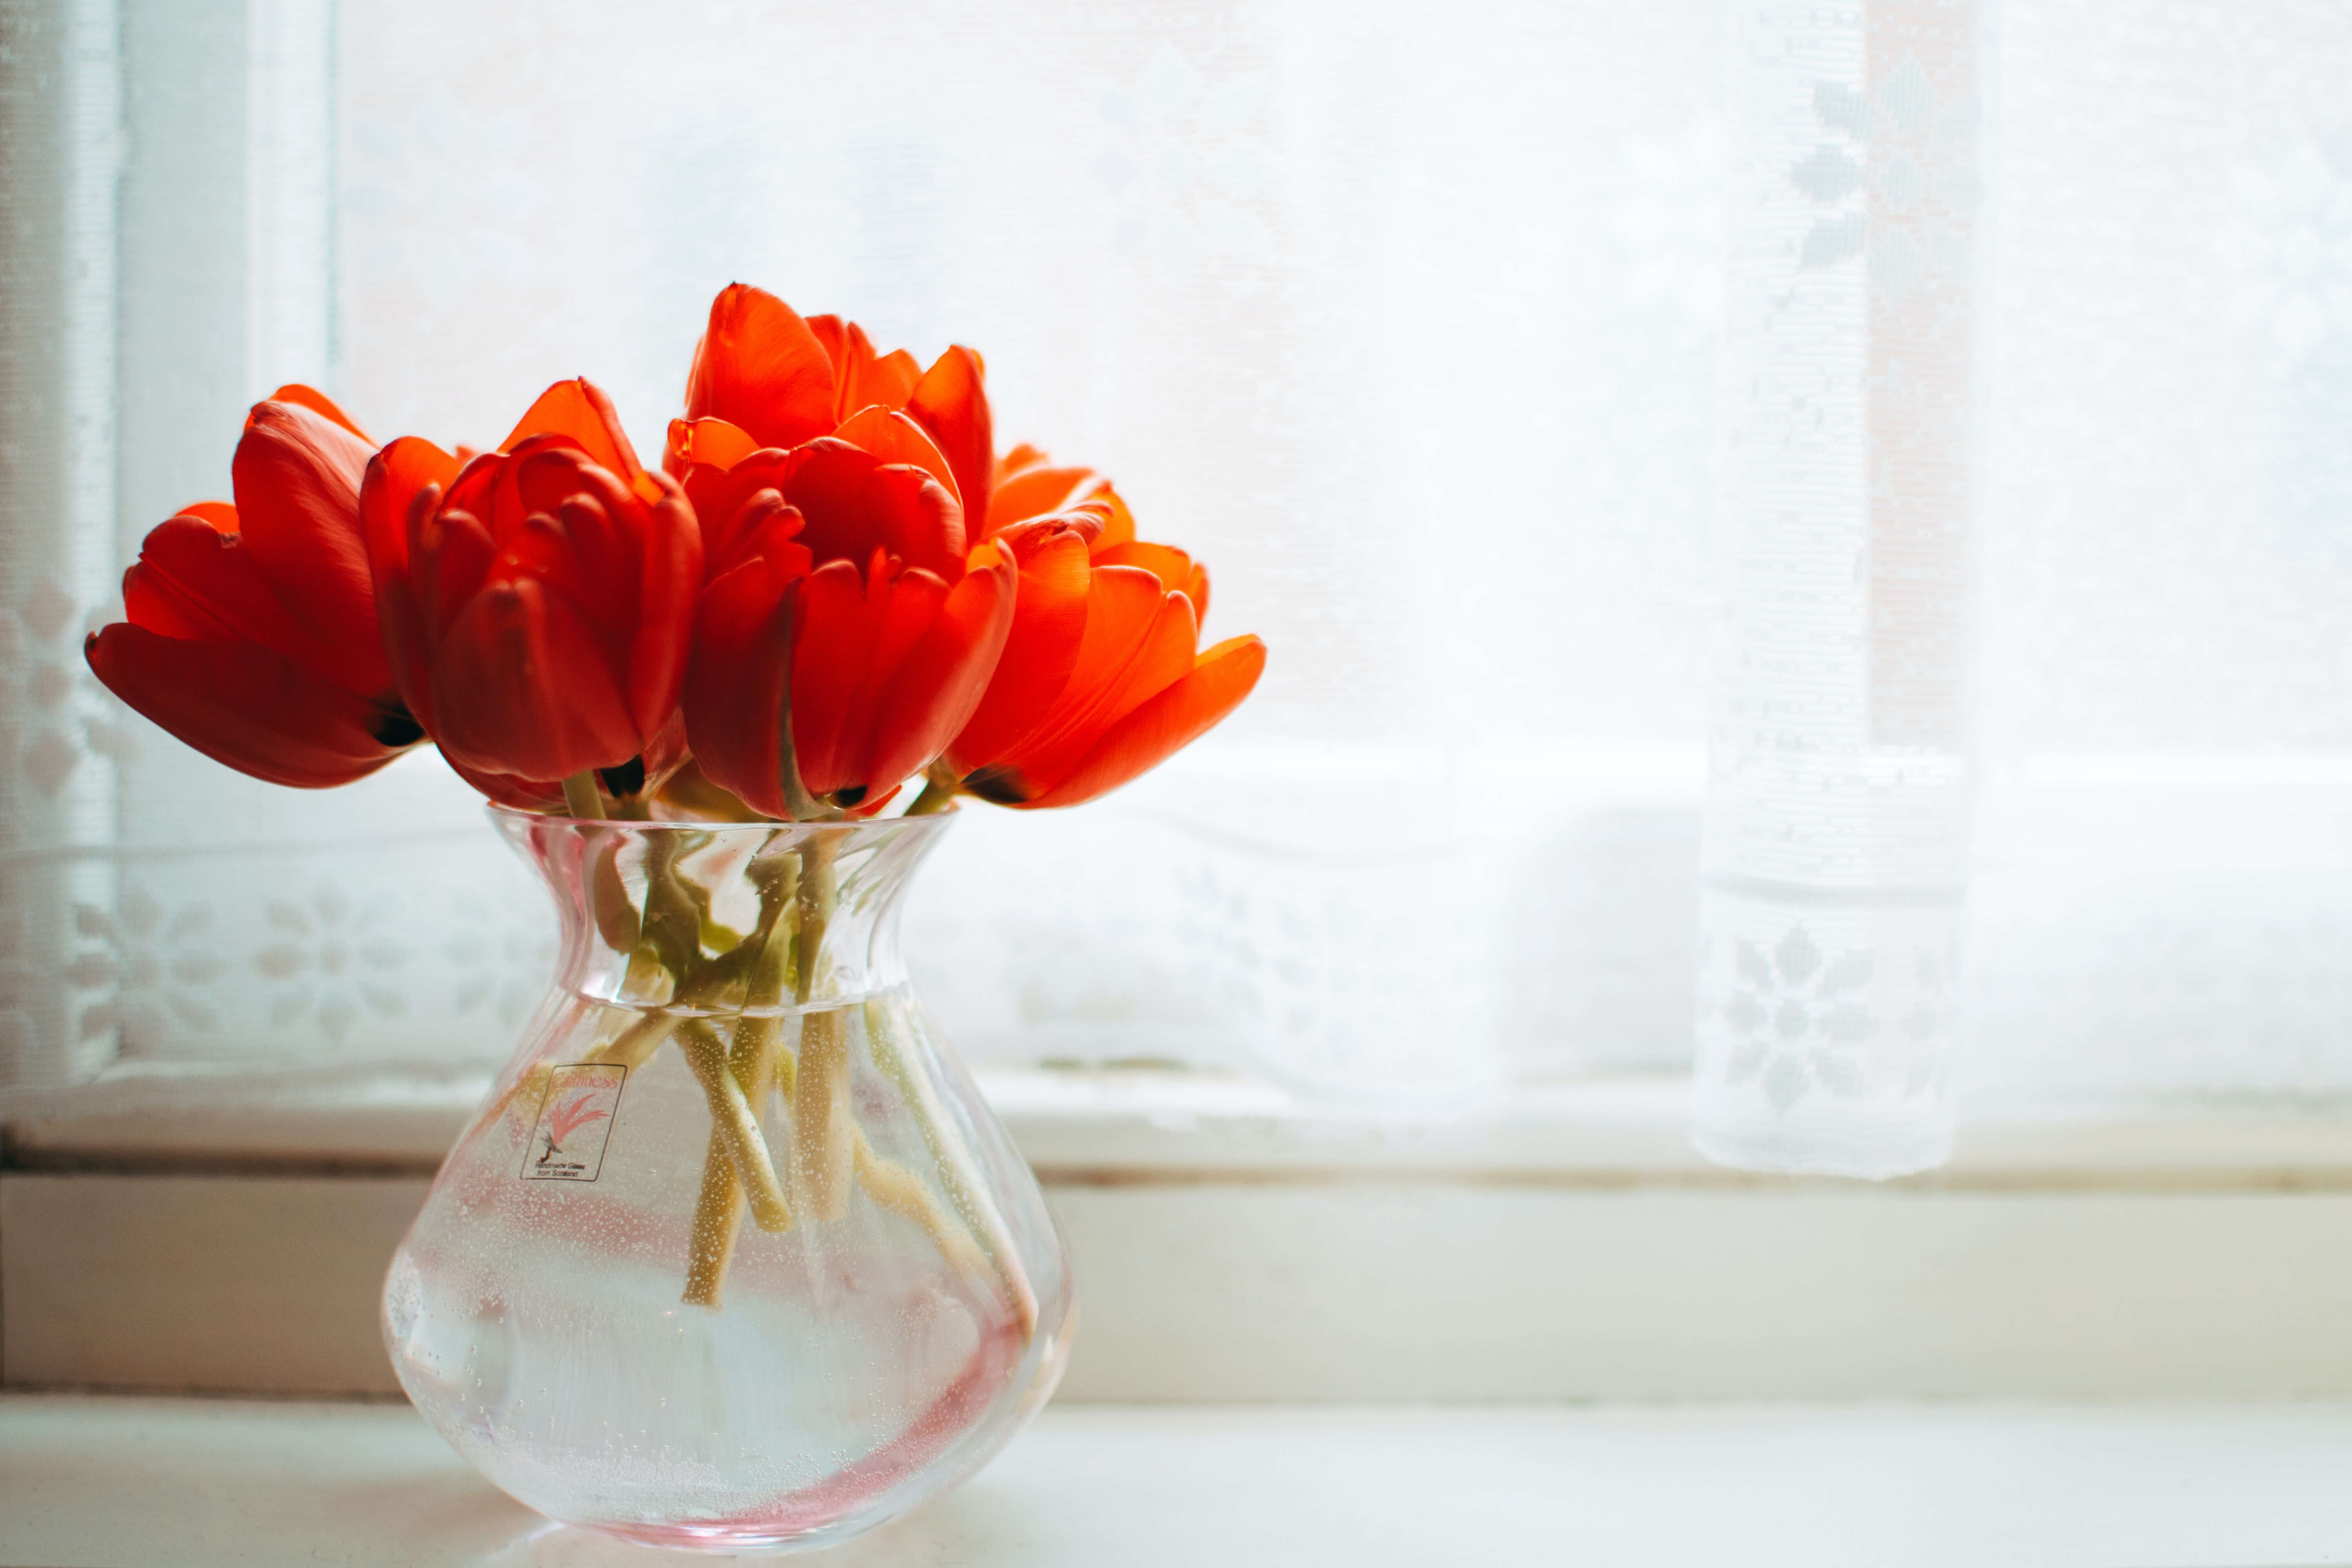 Orange Tulips in a Clear Vase